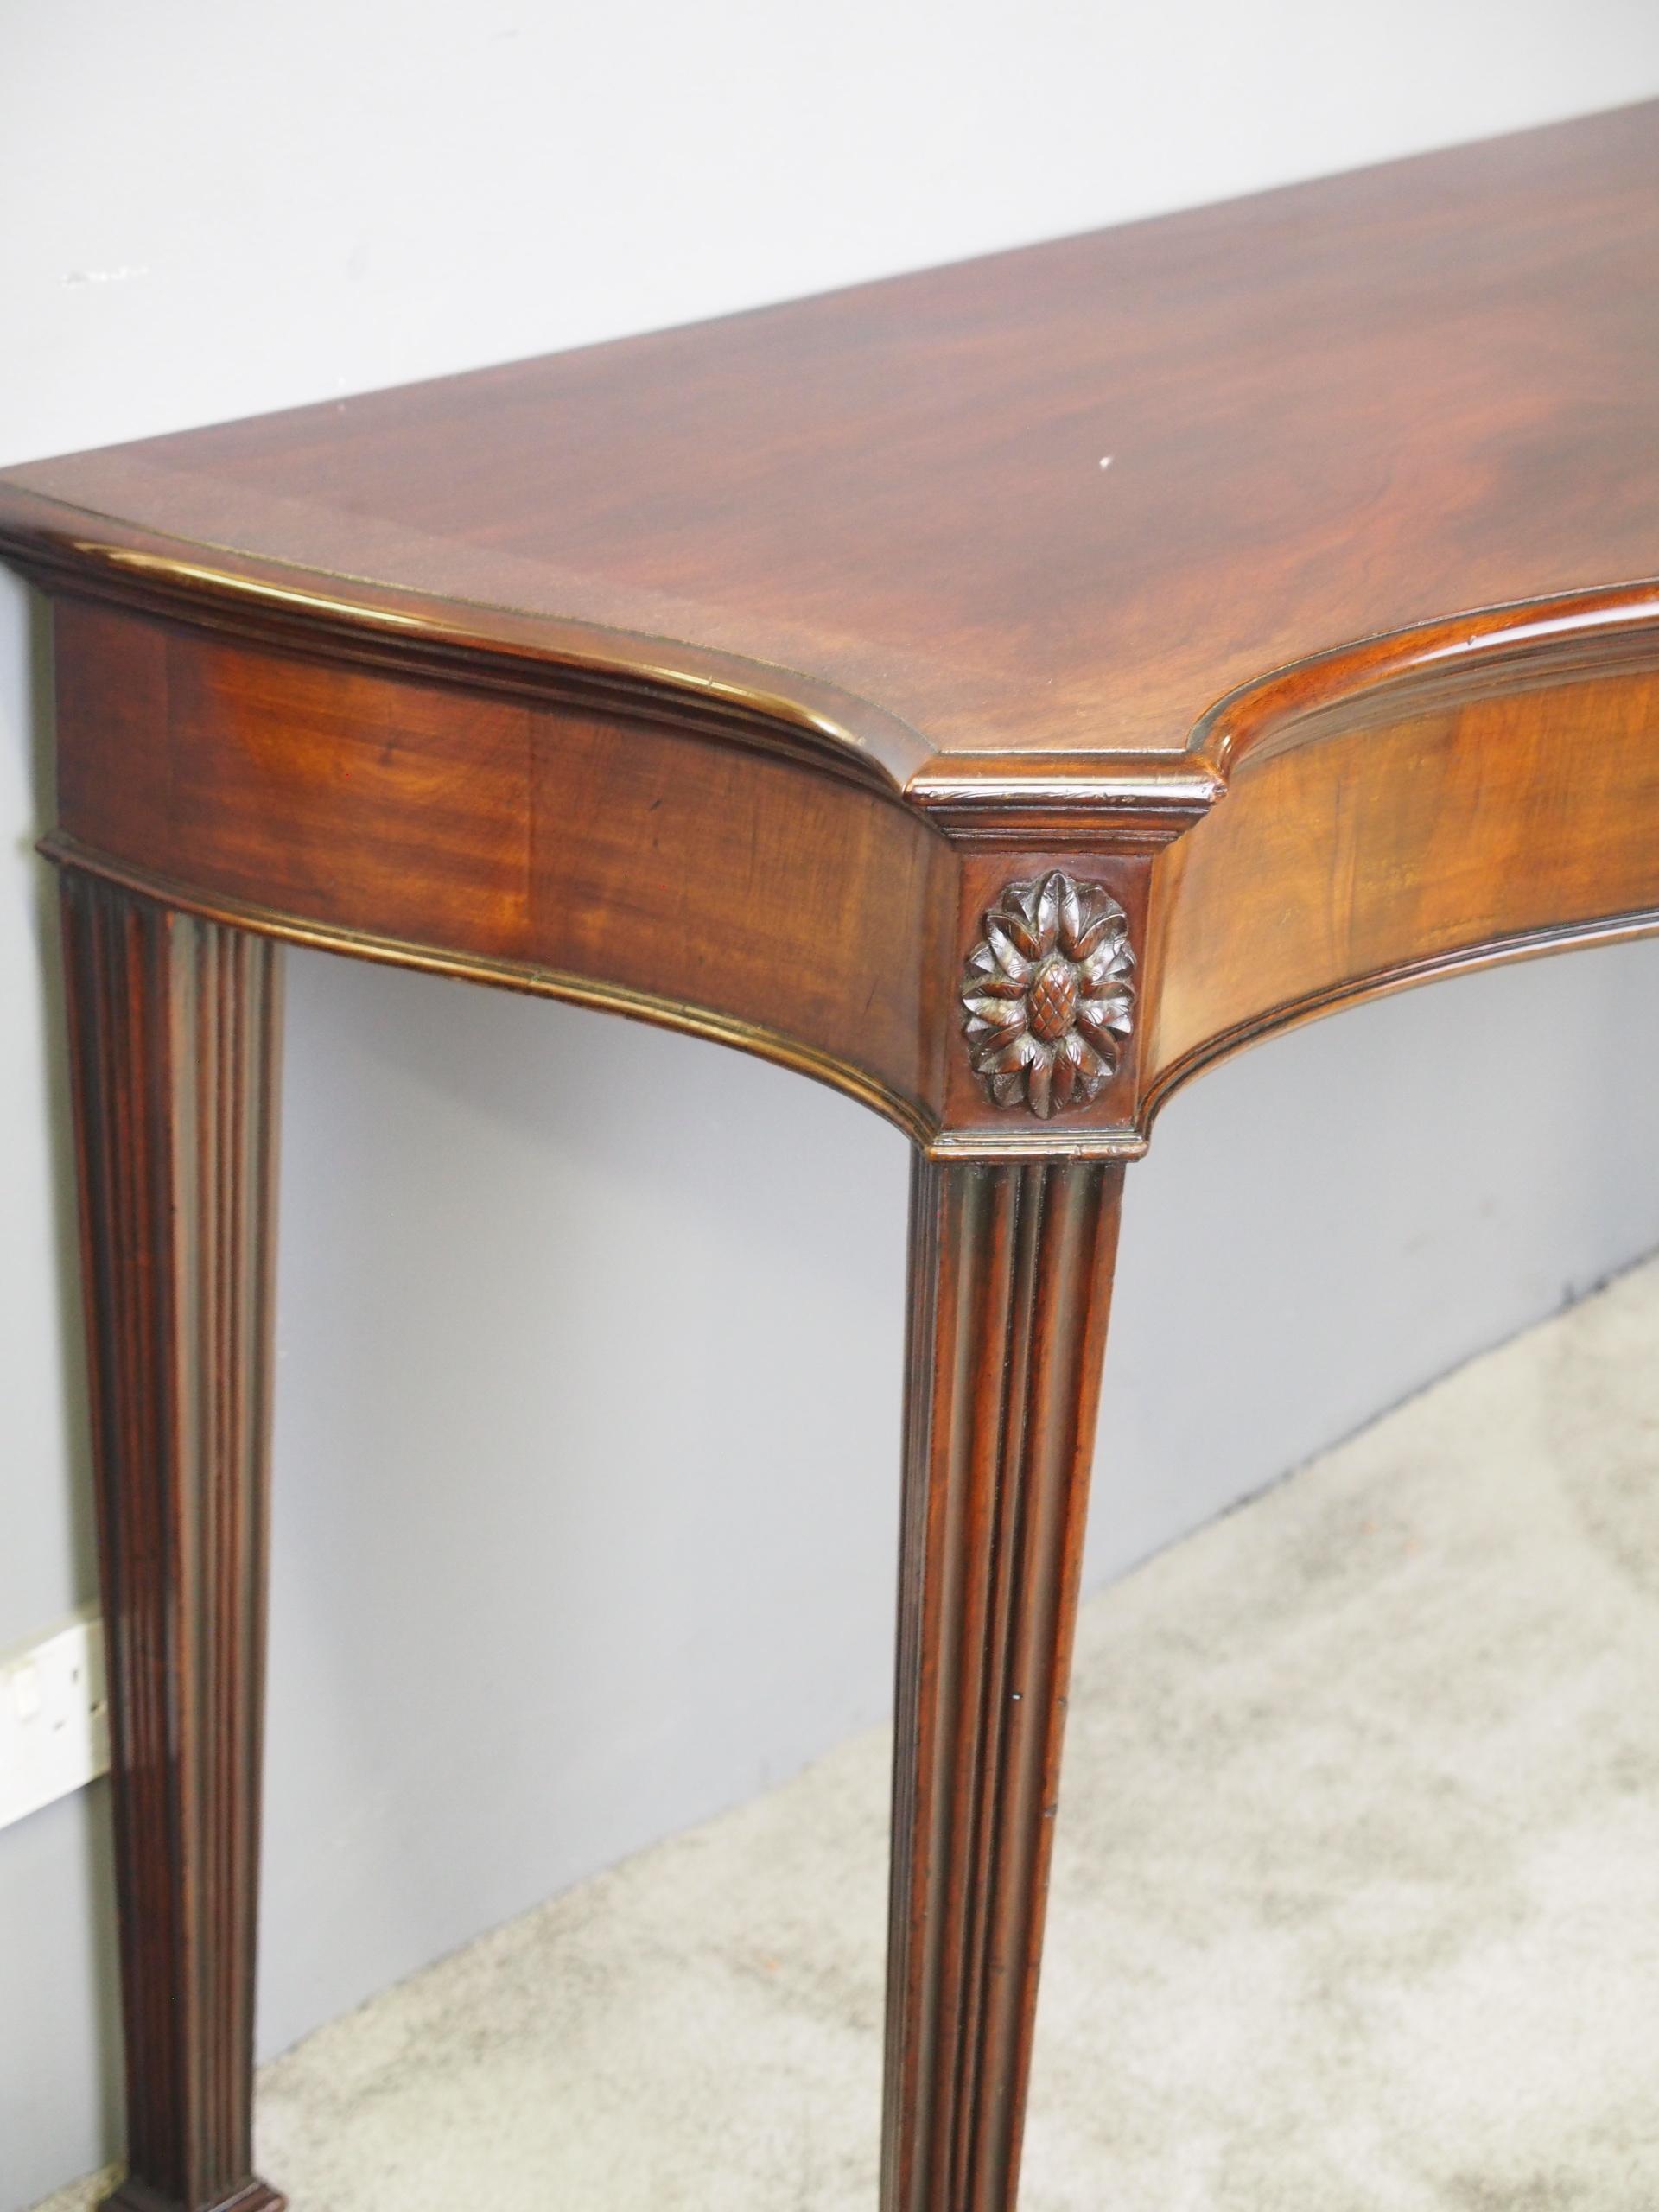 George III serpentine front mahogany hall or serving table, c irca 1780. The shaped top in rich figured Spanish mahogany with a molded fore-edge over a cross-banded frieze. There are canted corners with carved oval paterae over square, fluted,